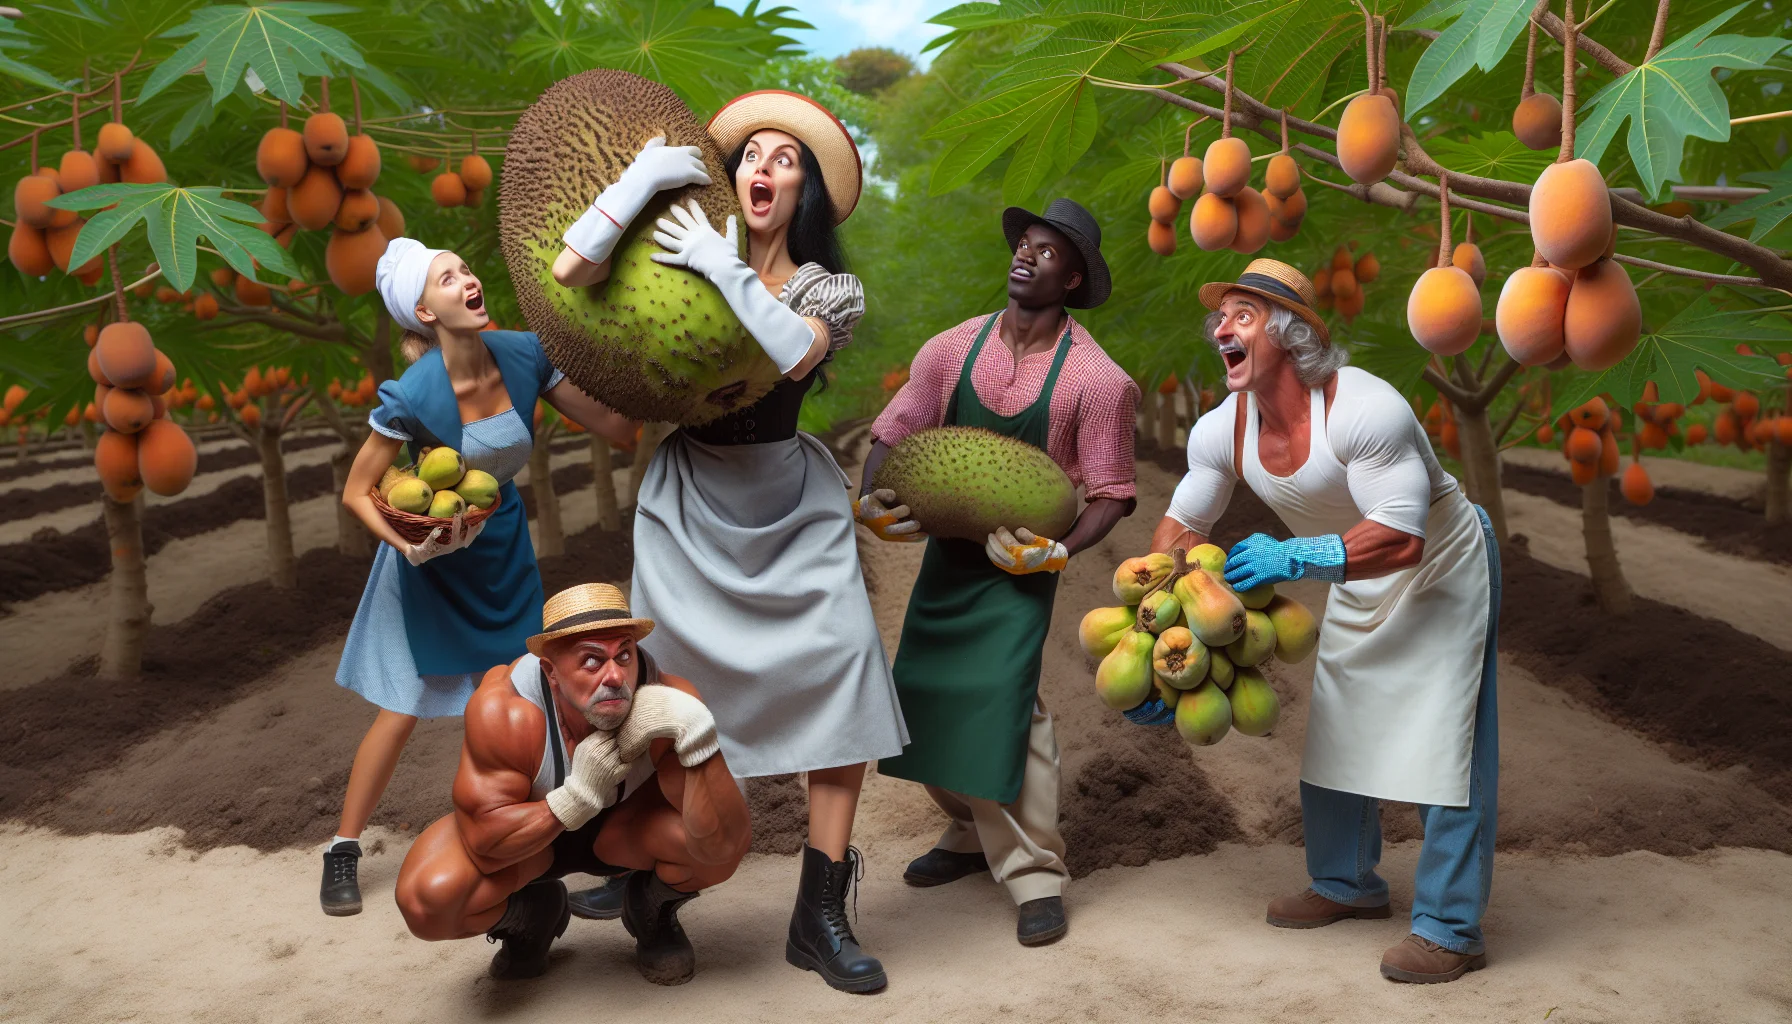 Create an incredibly humorous and realistic scene set in a lush pawpaw orchard. This should include people representing different descents such as Caucasian, Hispanic, Black, Middle-Eastern, and South Asian happening upon unexpectedly large pawpaw fruits. The Caucasian woman, dressed as a gardener with gloves and a hat, should be in a state of surprise as she carries a pawpaw fruit as big as her own head. A Middle-Eastern man nearby is straining to lift a cluster of heavy pawpaws with a shocked face. A South-Asian woman, Hispanic man, and Black woman should all be laughing heartily in their gardening attire at this bizarre sight, thus creating a jovial atmosphere that embodies the joy of gardening.